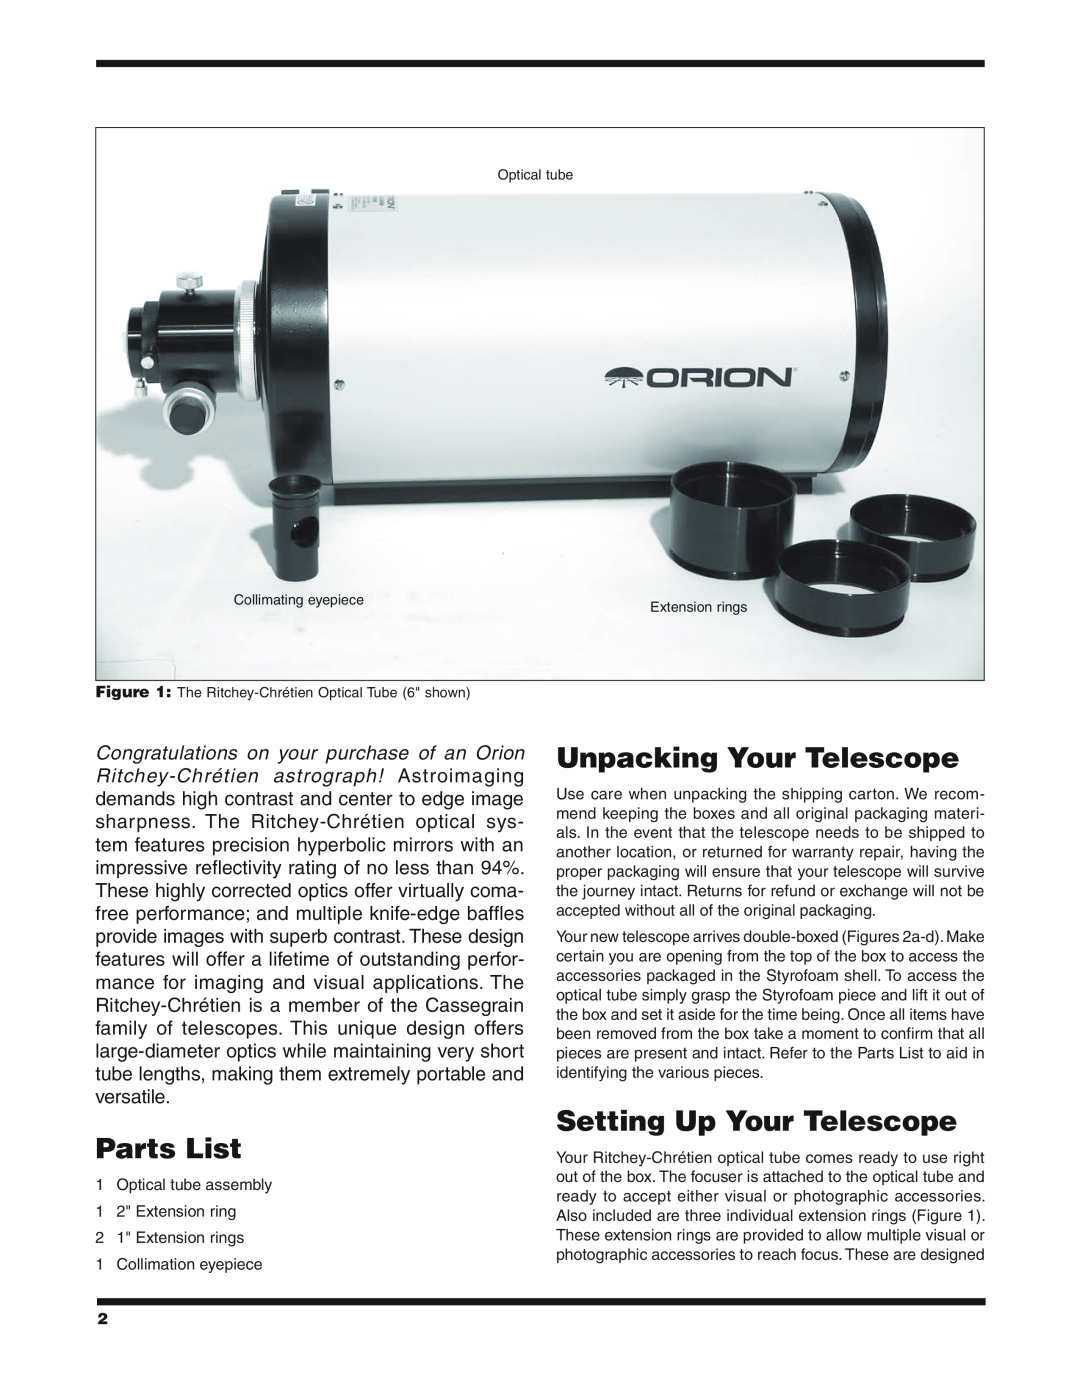 Orion 8958, 8956 instruction manual Parts List, Unpacking Your Telescope, Setting Up Your Telescope 